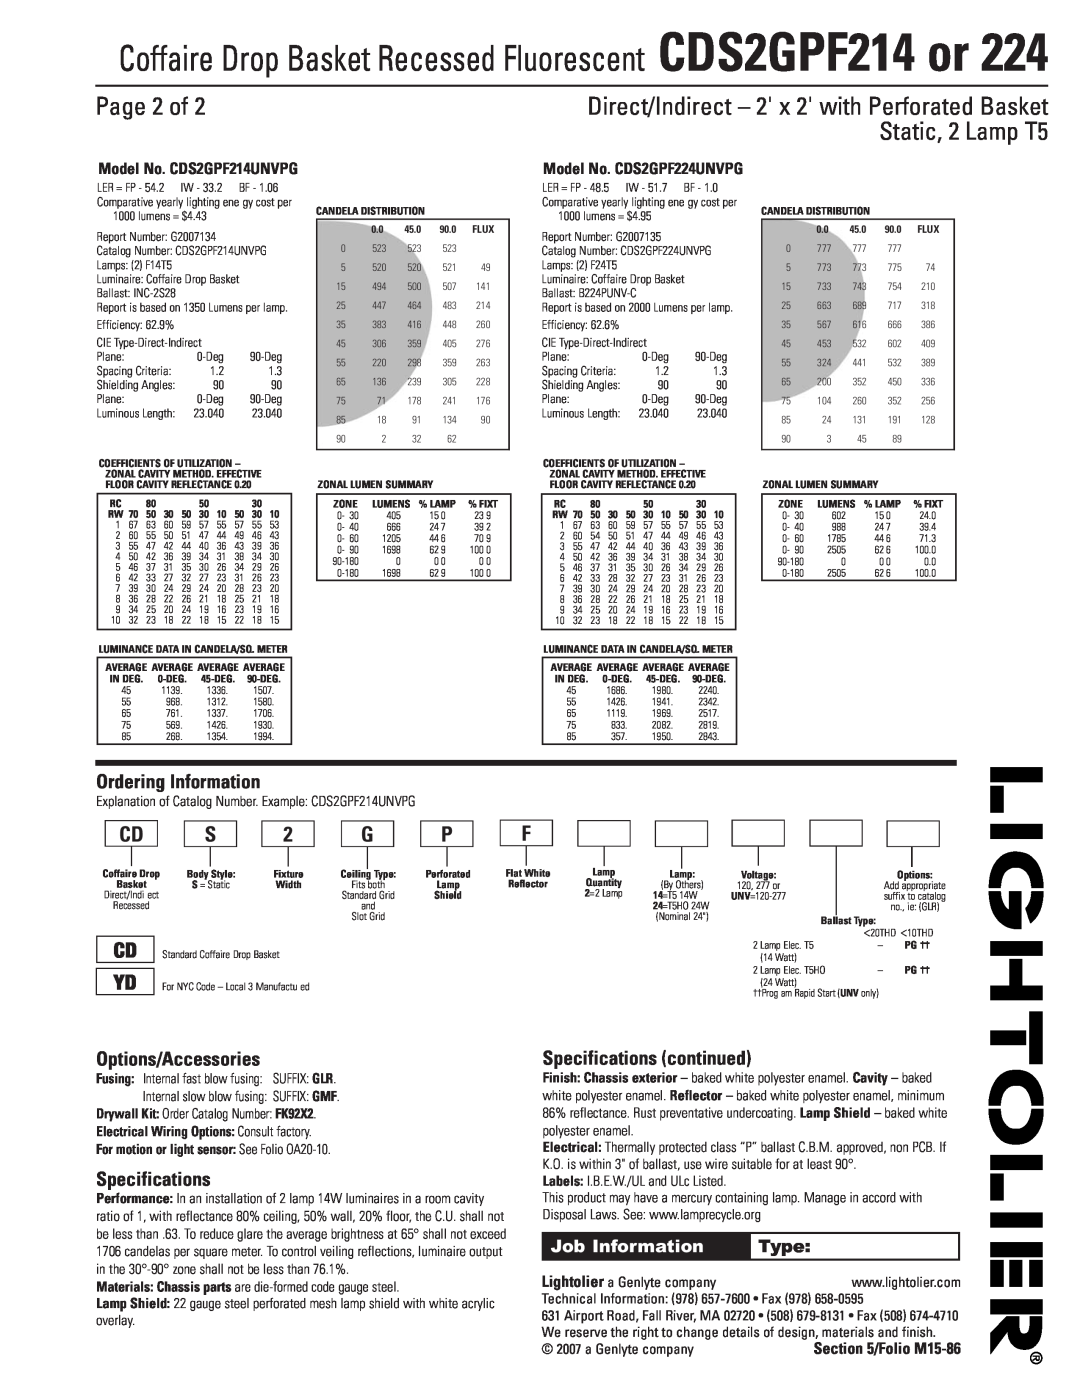 Lightolier CDS2GPF214 or 224 Page 2 of, Ordering Information, Options/Accessories, Specifications continued, Type 